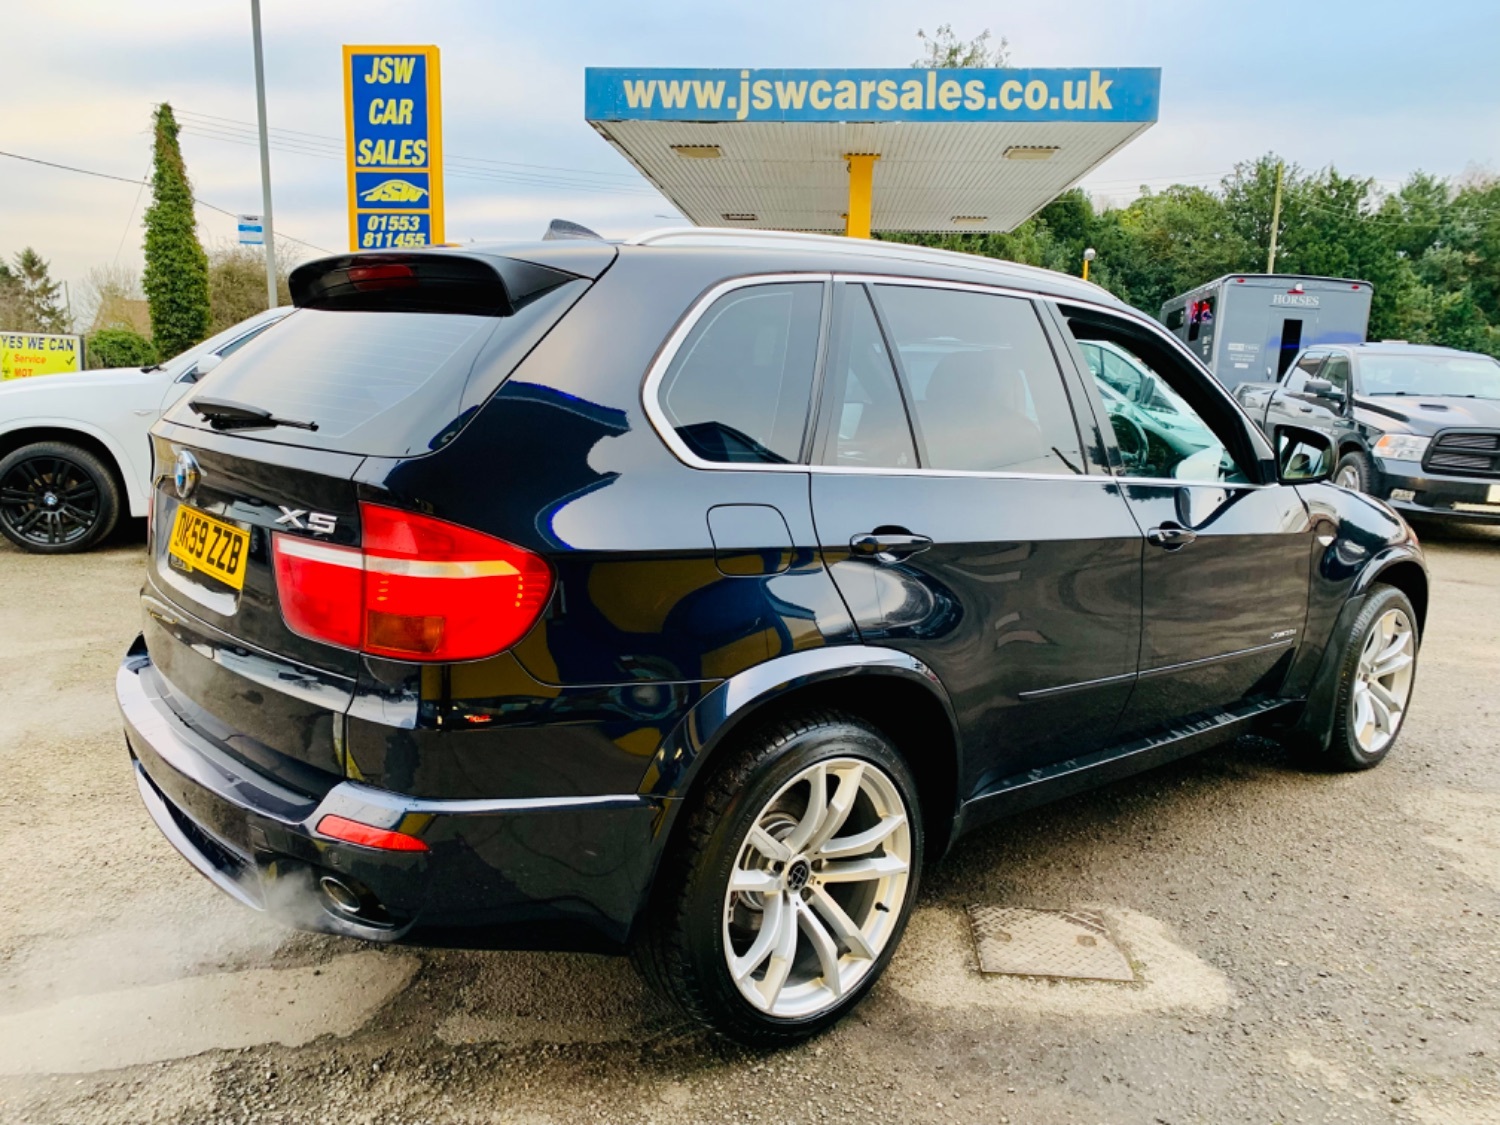 bmw x5 e53 used – Search for your used car on the parking